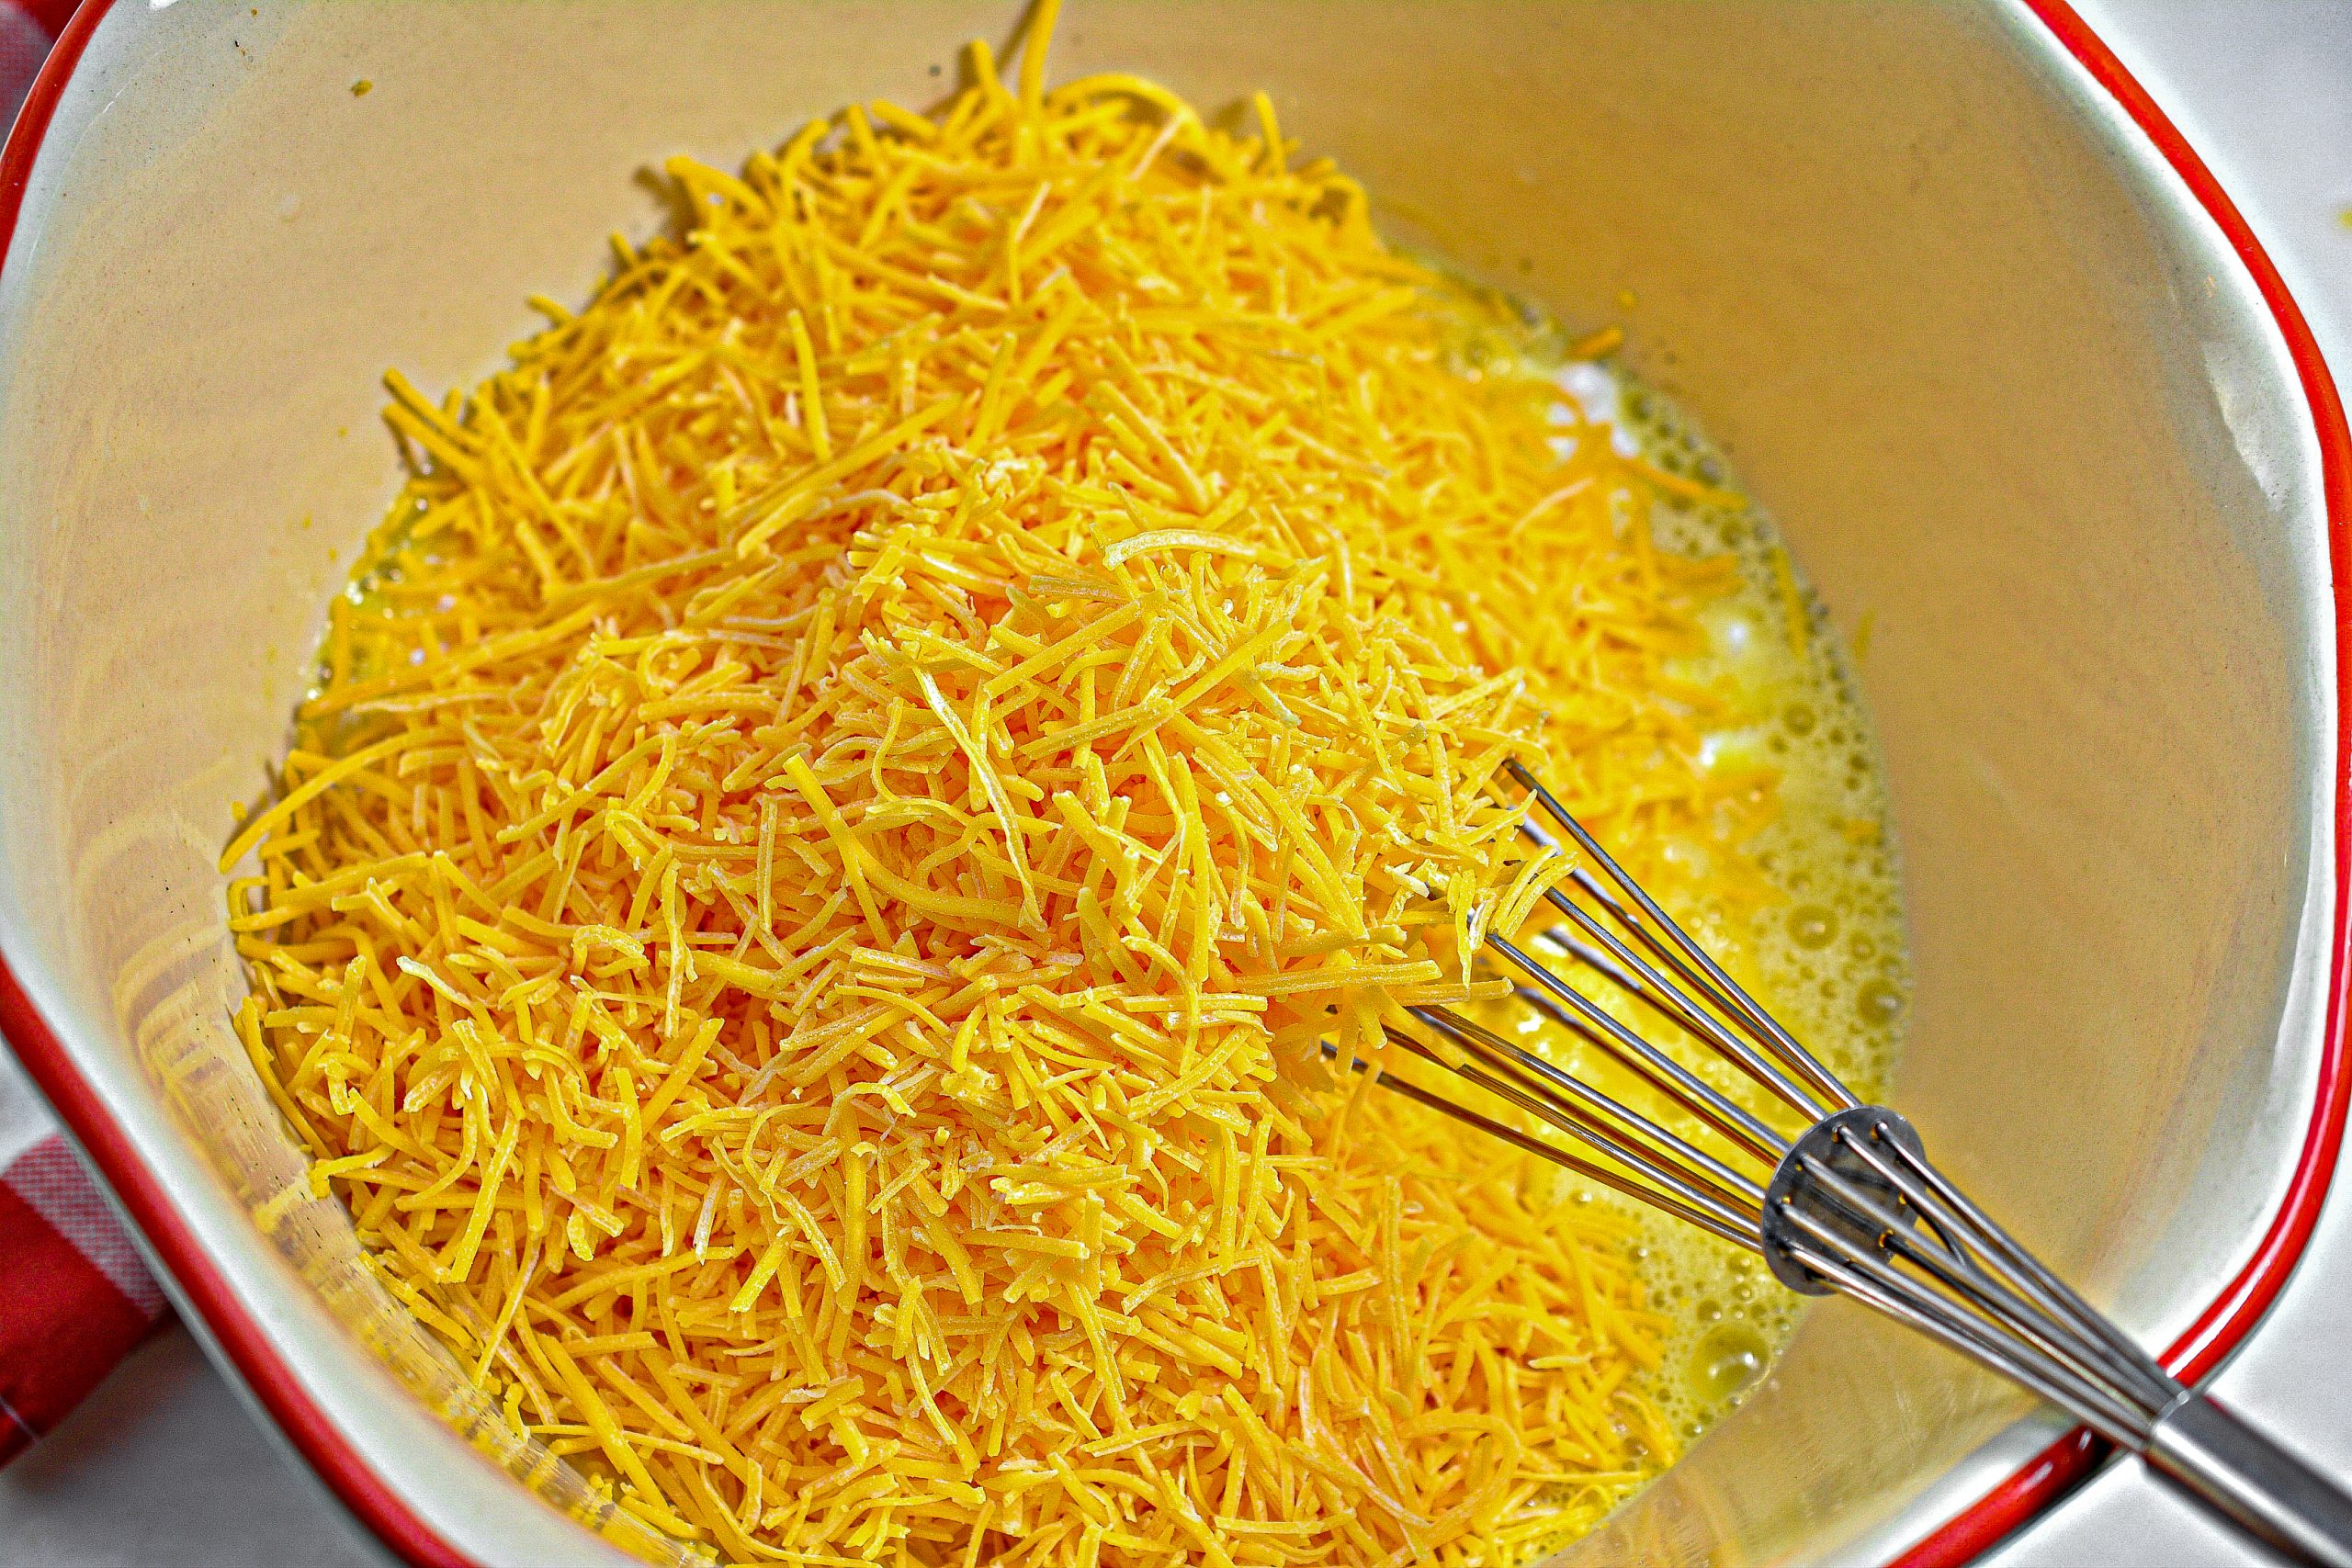 Mix together the eggs, cottage cheese, cheddar cheese, the meat mixture, and salt and pepper to taste until well blended.